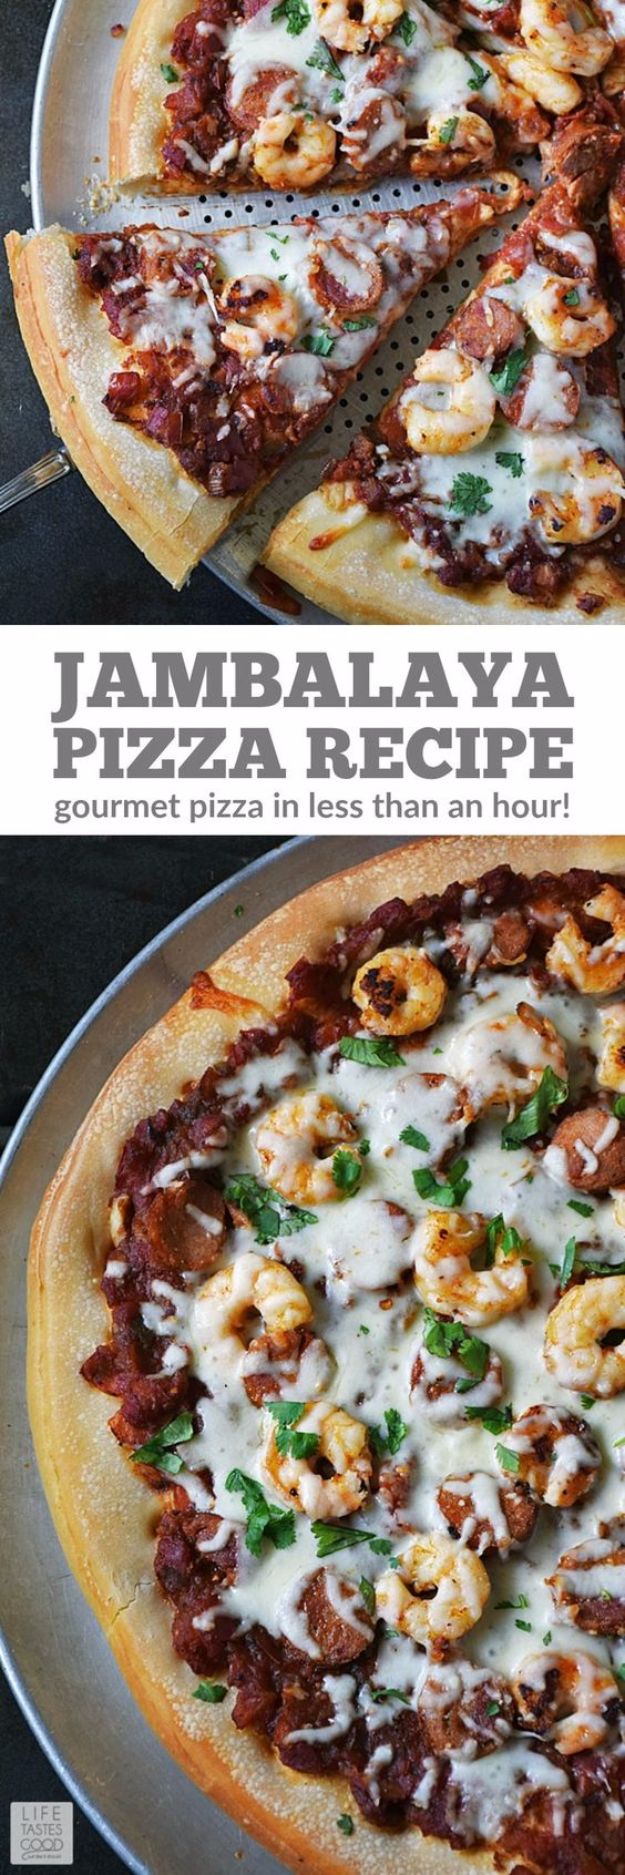 Best Pizza Recipes - Jambalaya Pizza - Homemade Pizza Recipe Ideas for Healthy, Easy Dinner, Lunch and Snacks - How To Make Pizza Dough at Home - Step by Step Tutorials for Varieties with Pepperoni, Gourmet and Unique Tips With Pillsbury Biscuits, for Kids, With Chicken and French Bread - Thin Crust and Deep Dish Pizzas #pizza #recipes